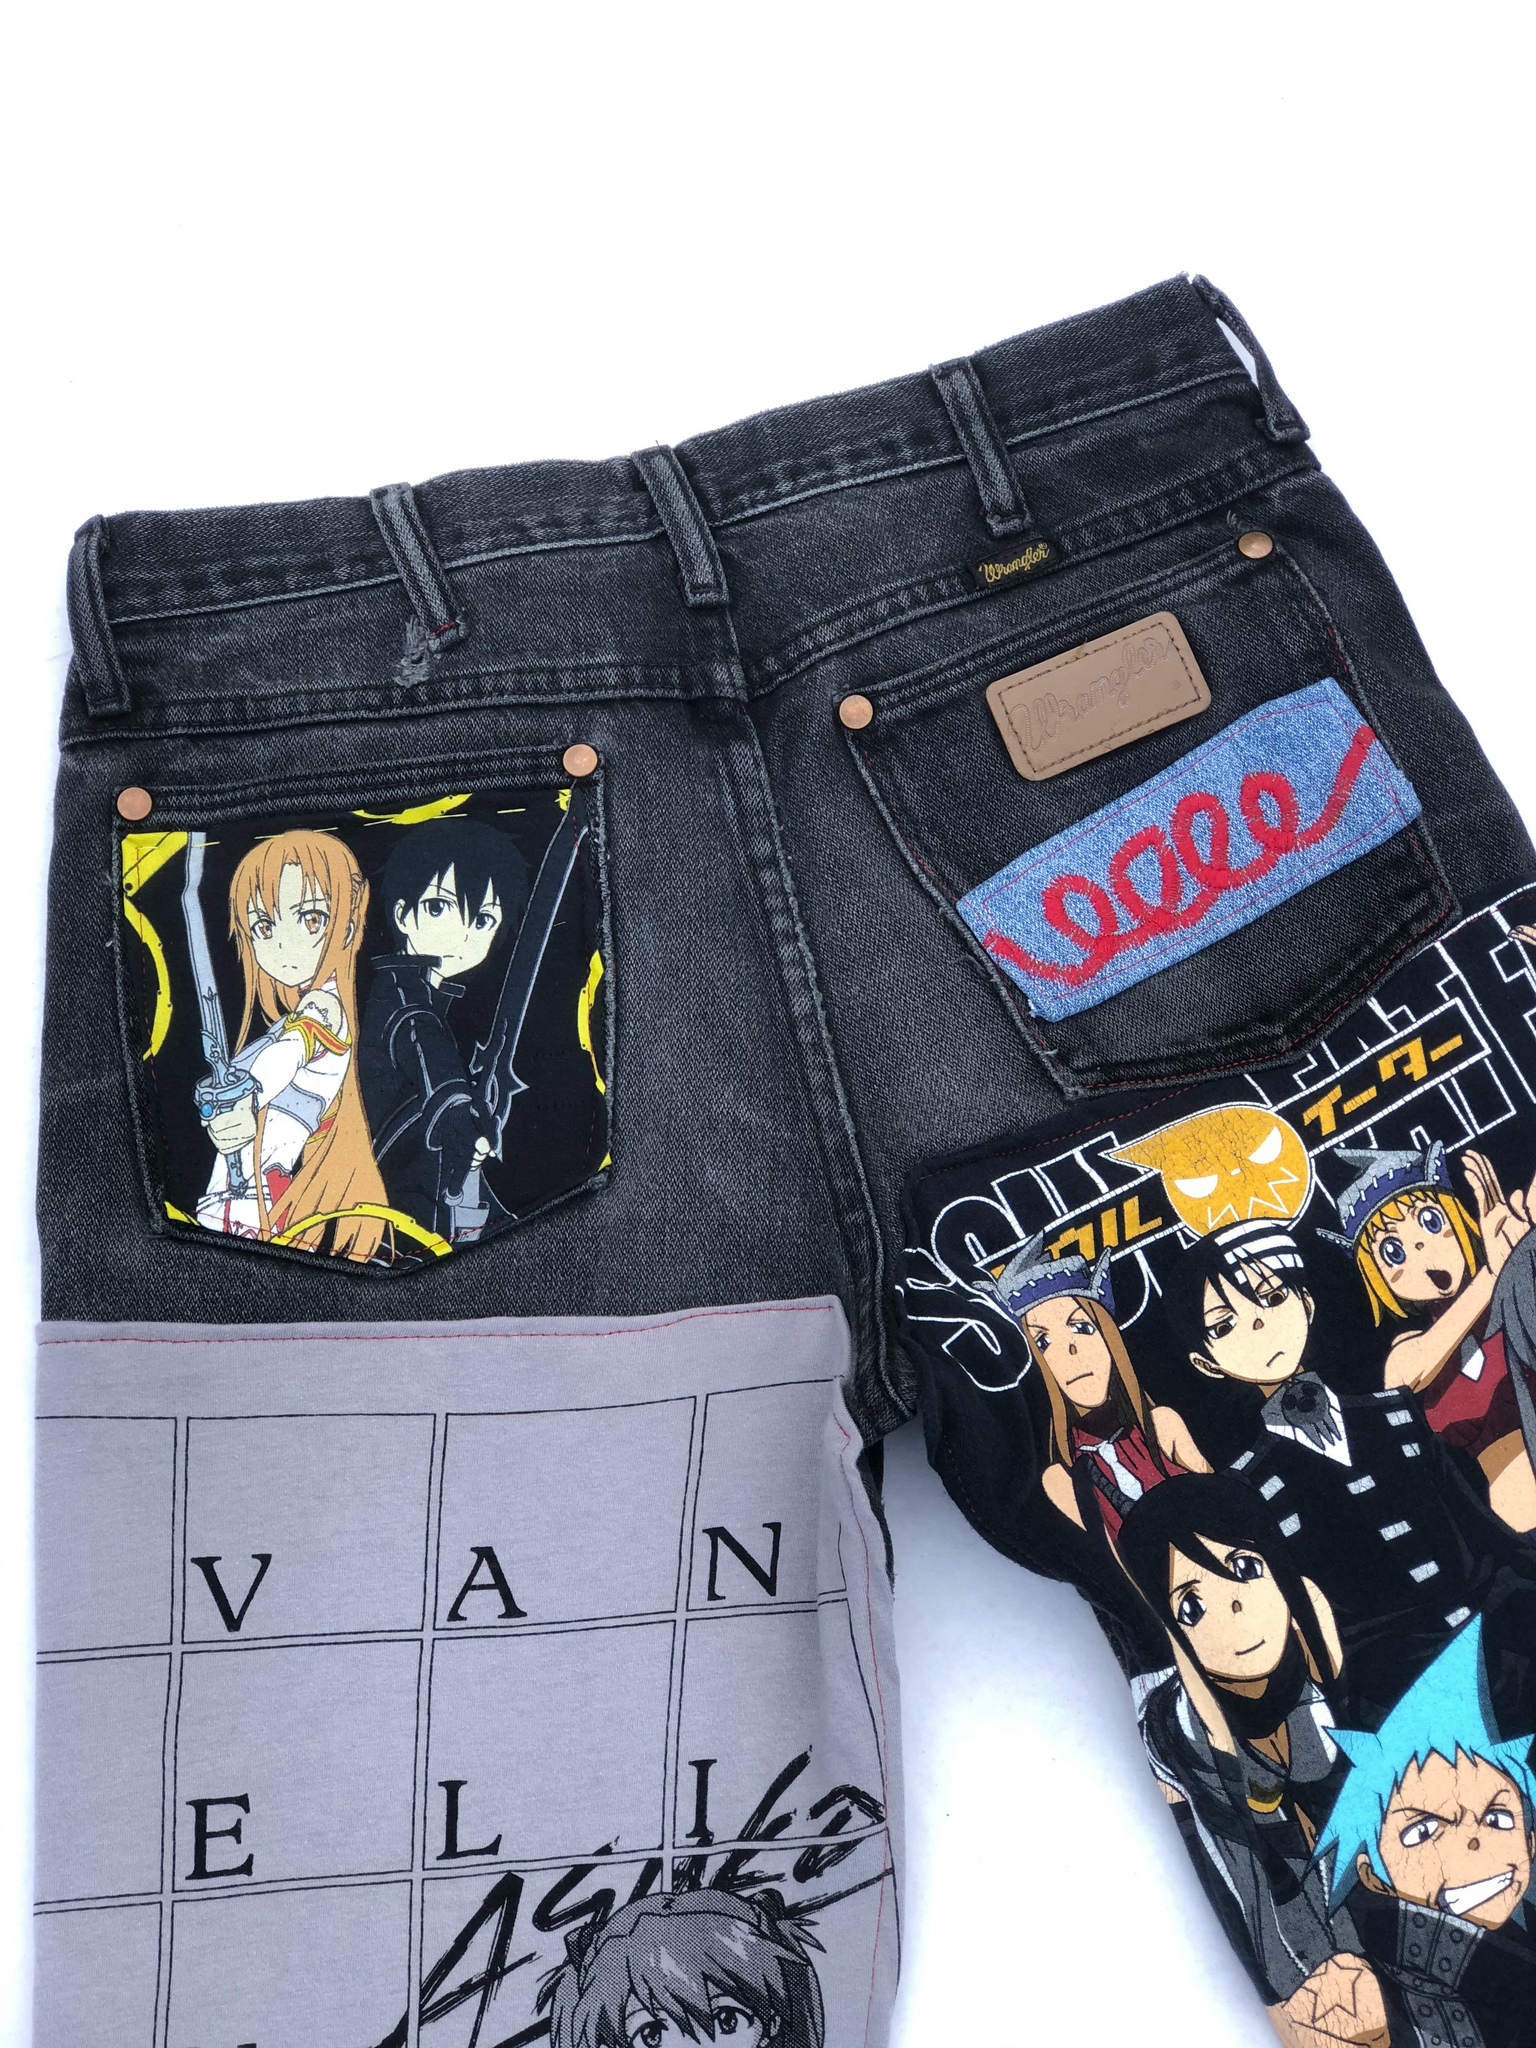 Buy Hand Painted Anime Jeans / My Hero Jeans Online in India - Etsy